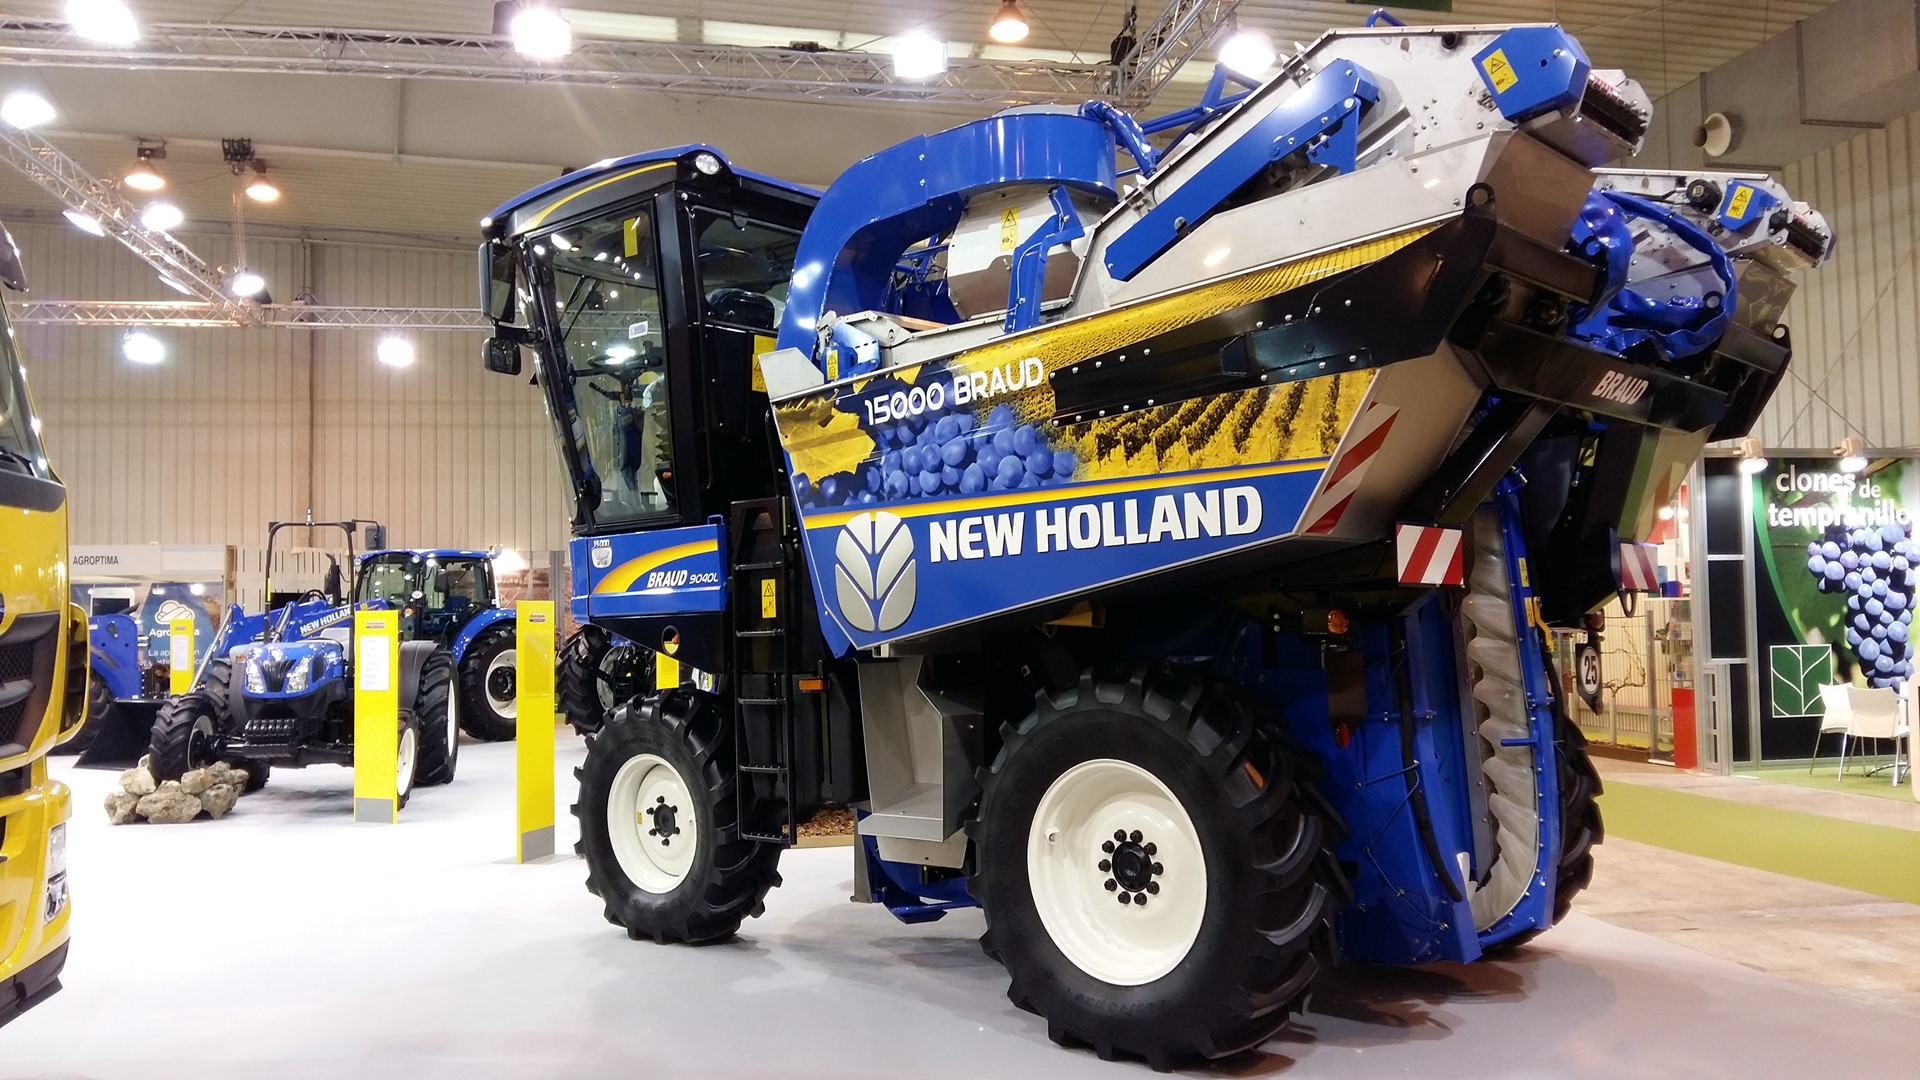 New Holland Agriculture celebrates as the 15,000th Braud grape harvester rolls off the production lines